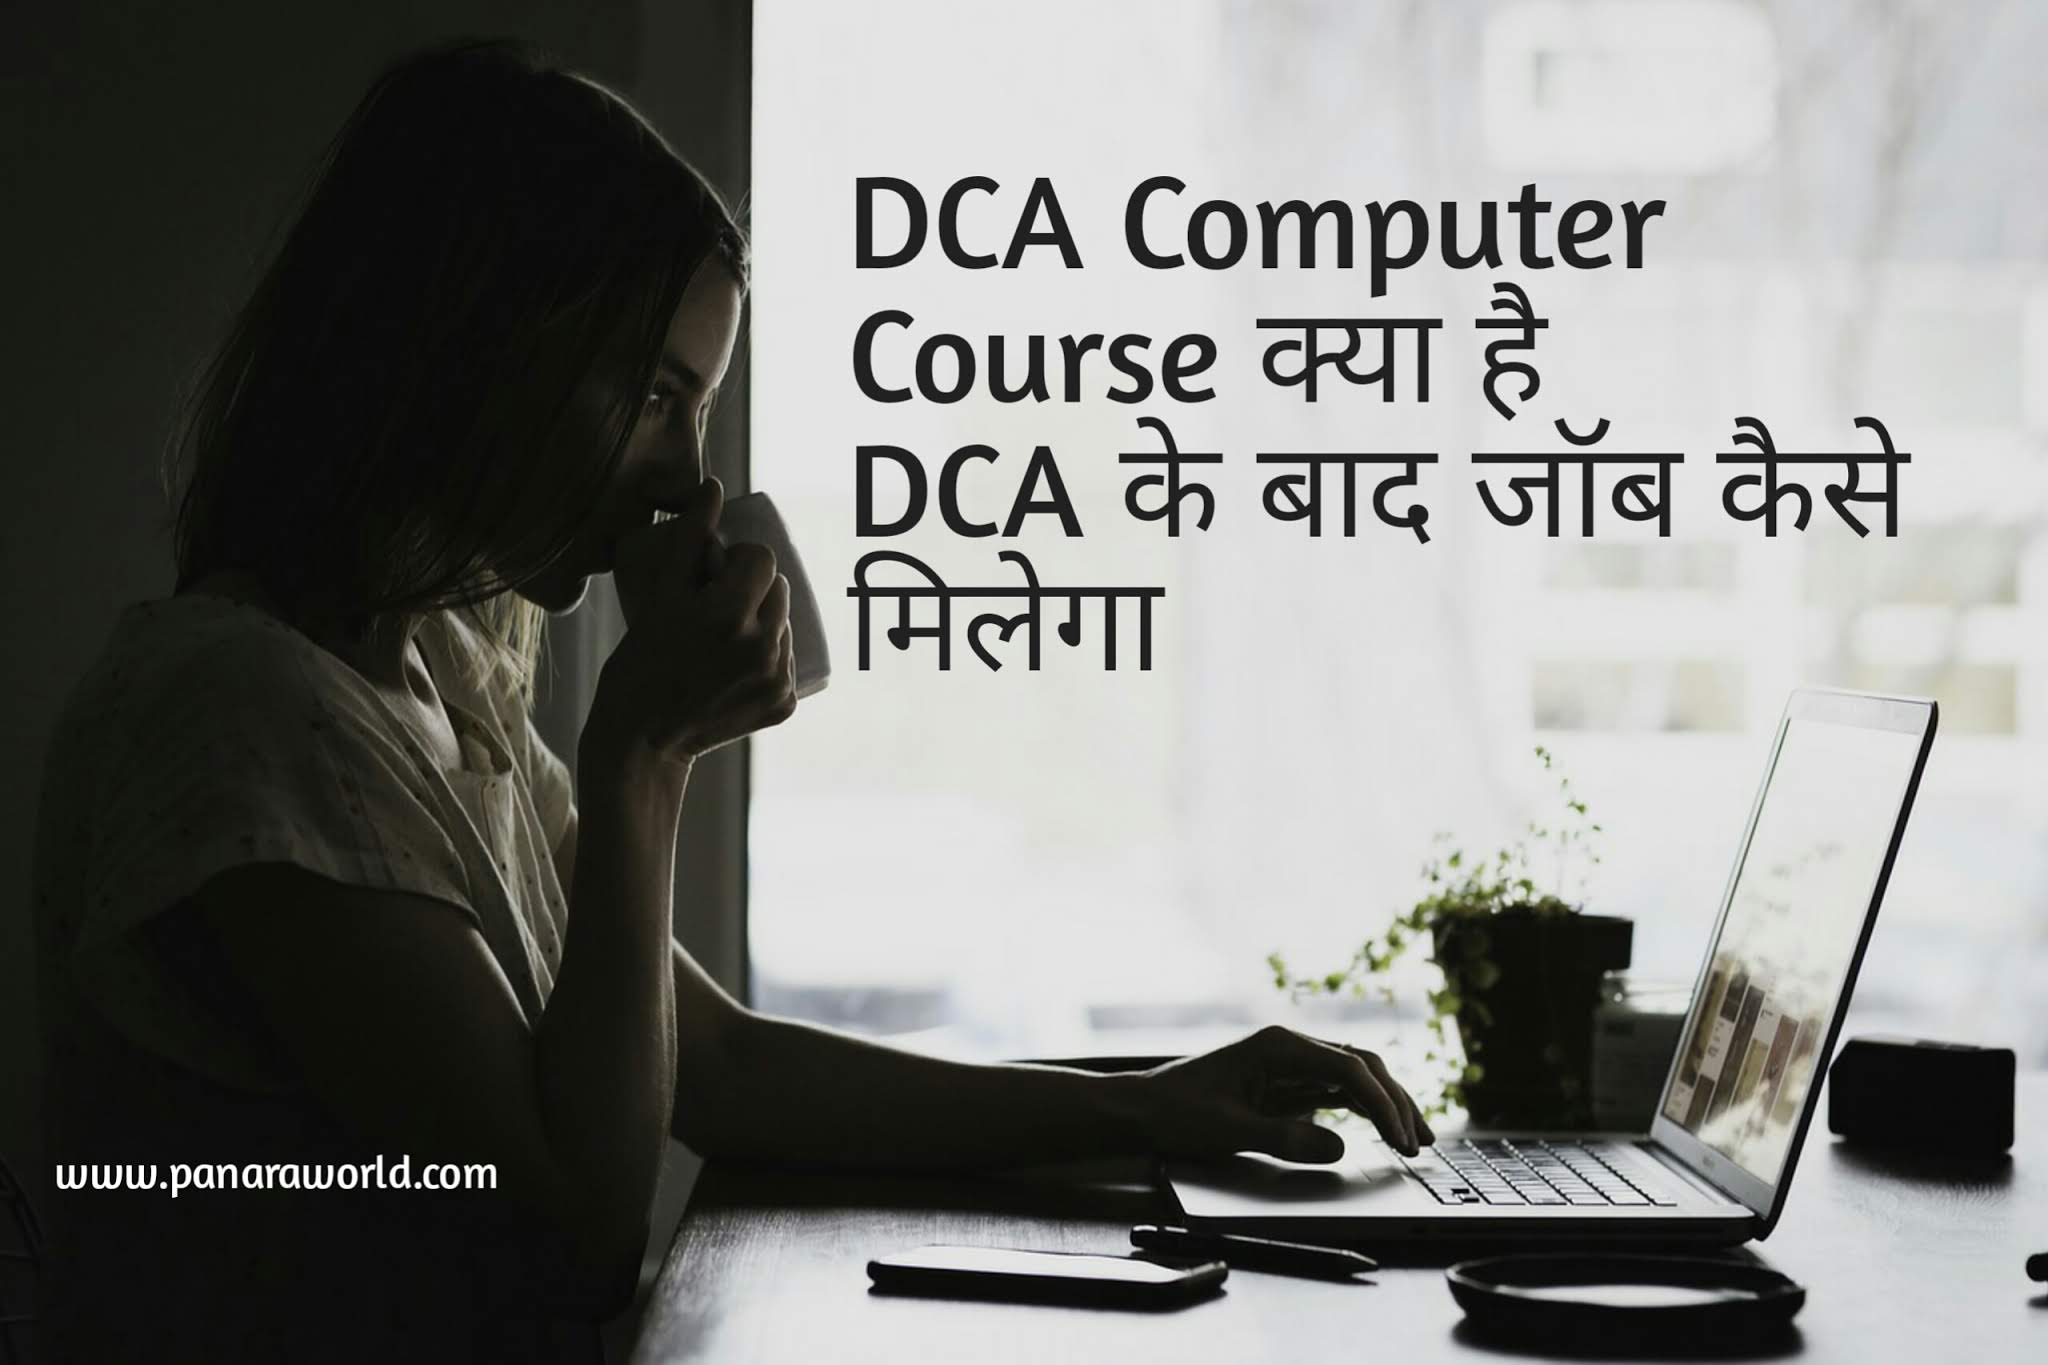 DCA Computer Course Details In Hindi